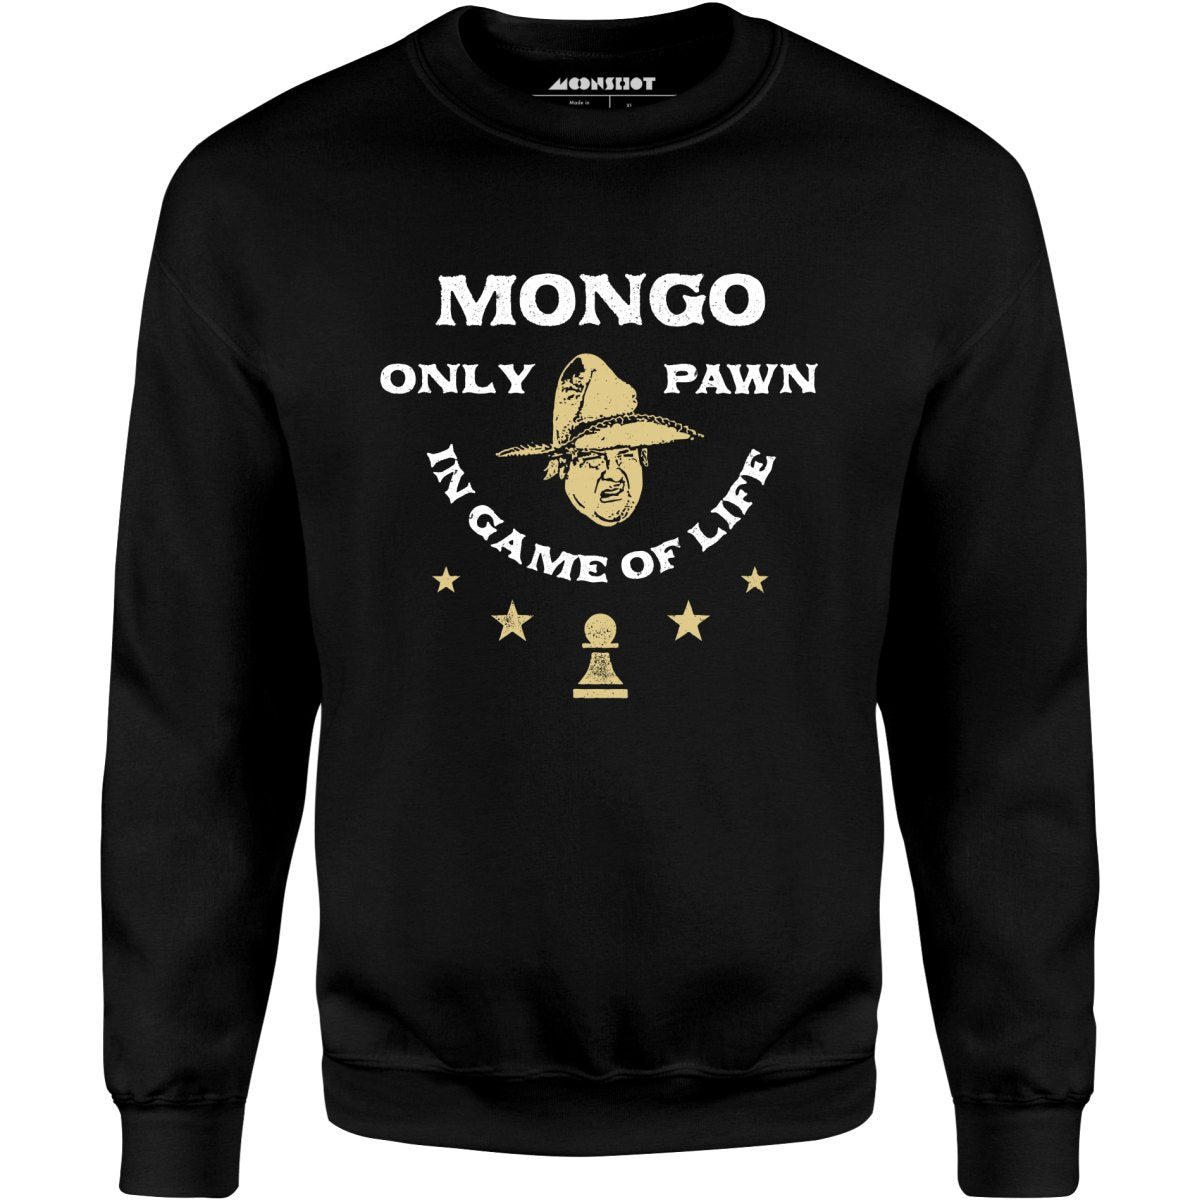 Mongo Only Pawn in Game of Life - Unisex Sweatshirt